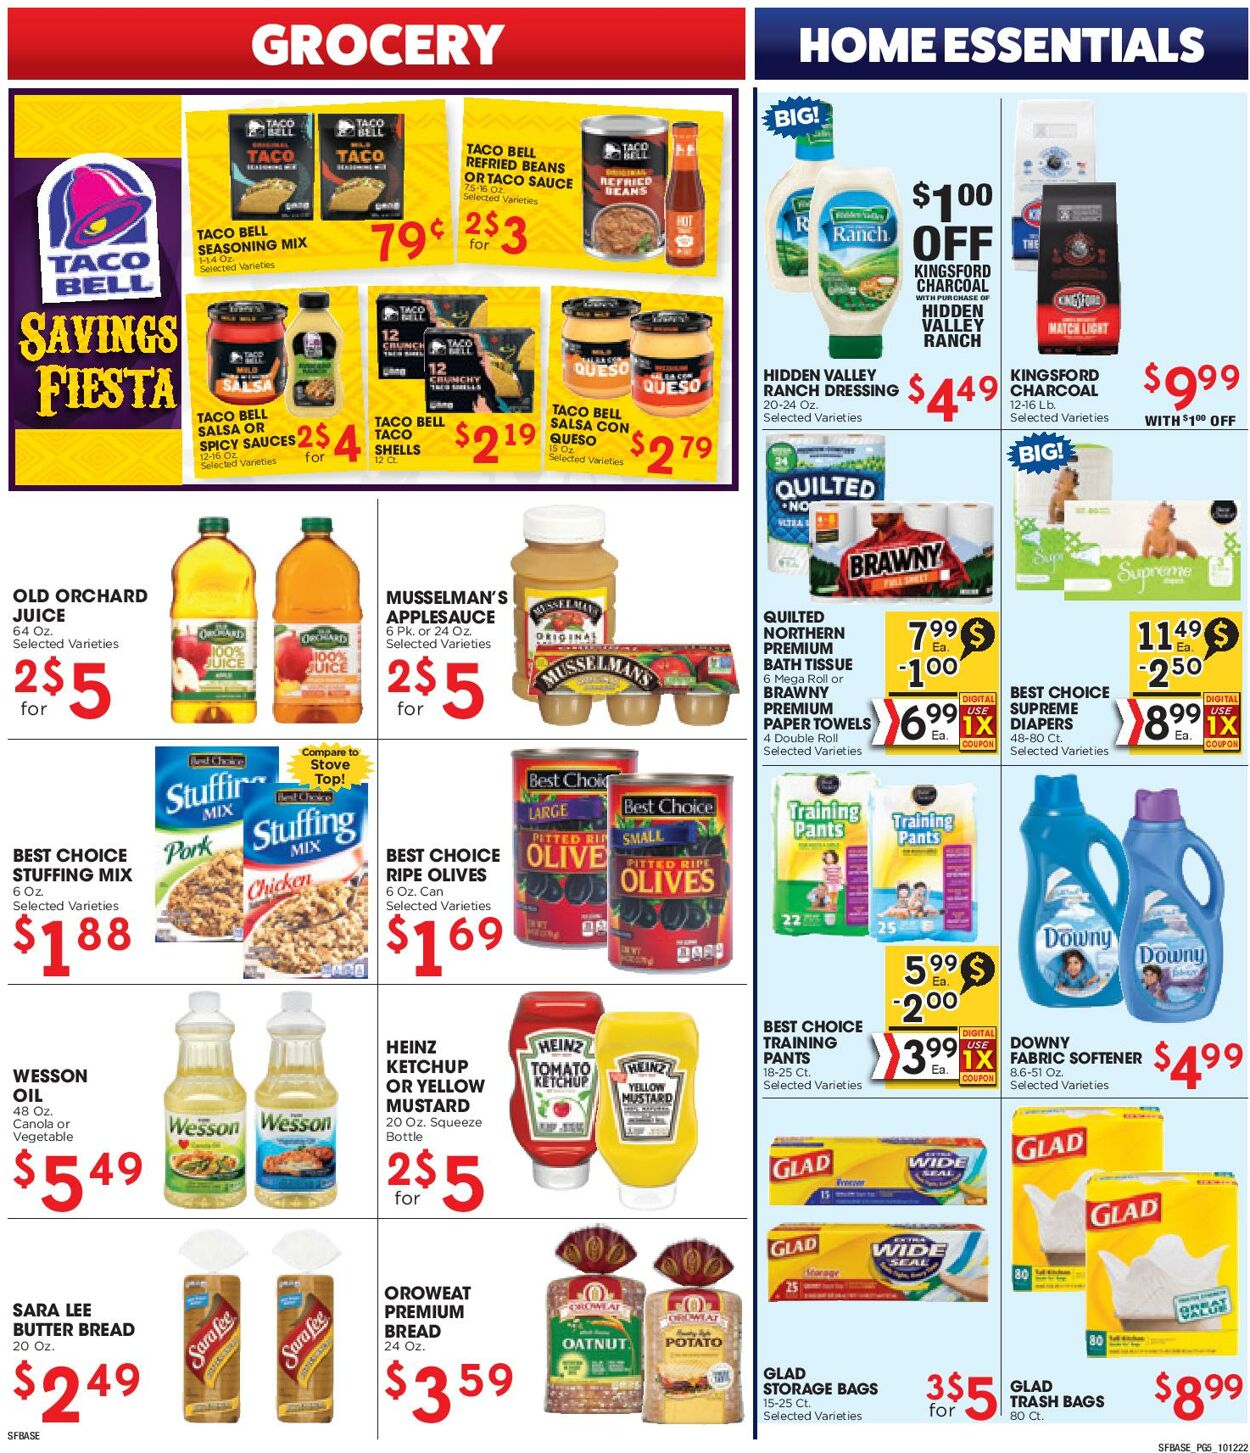 Sunshine Foods Ad from 10/12/2022